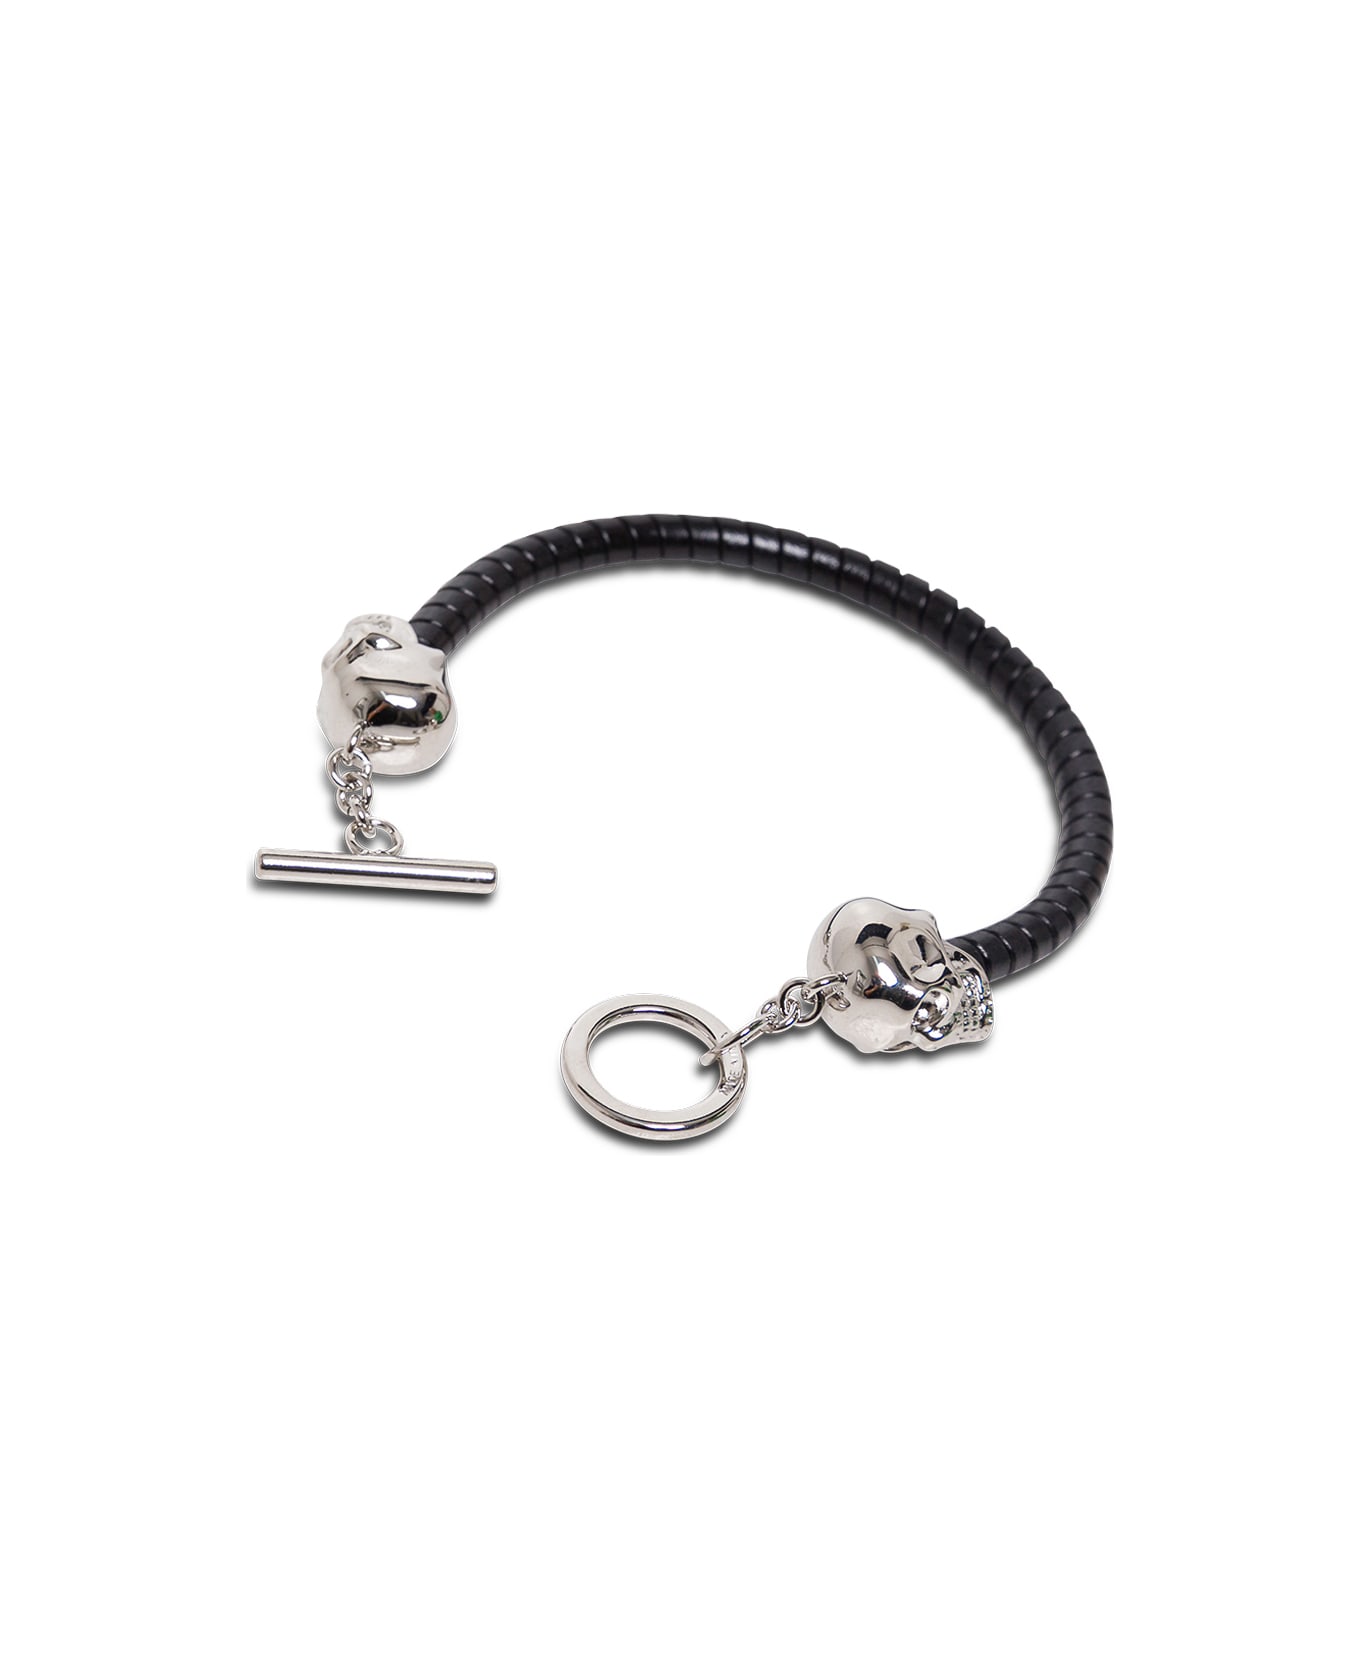 Alexander McQueen Skull Black Leather And Brass Bracelet  Alexander Mcqueen Man - Black